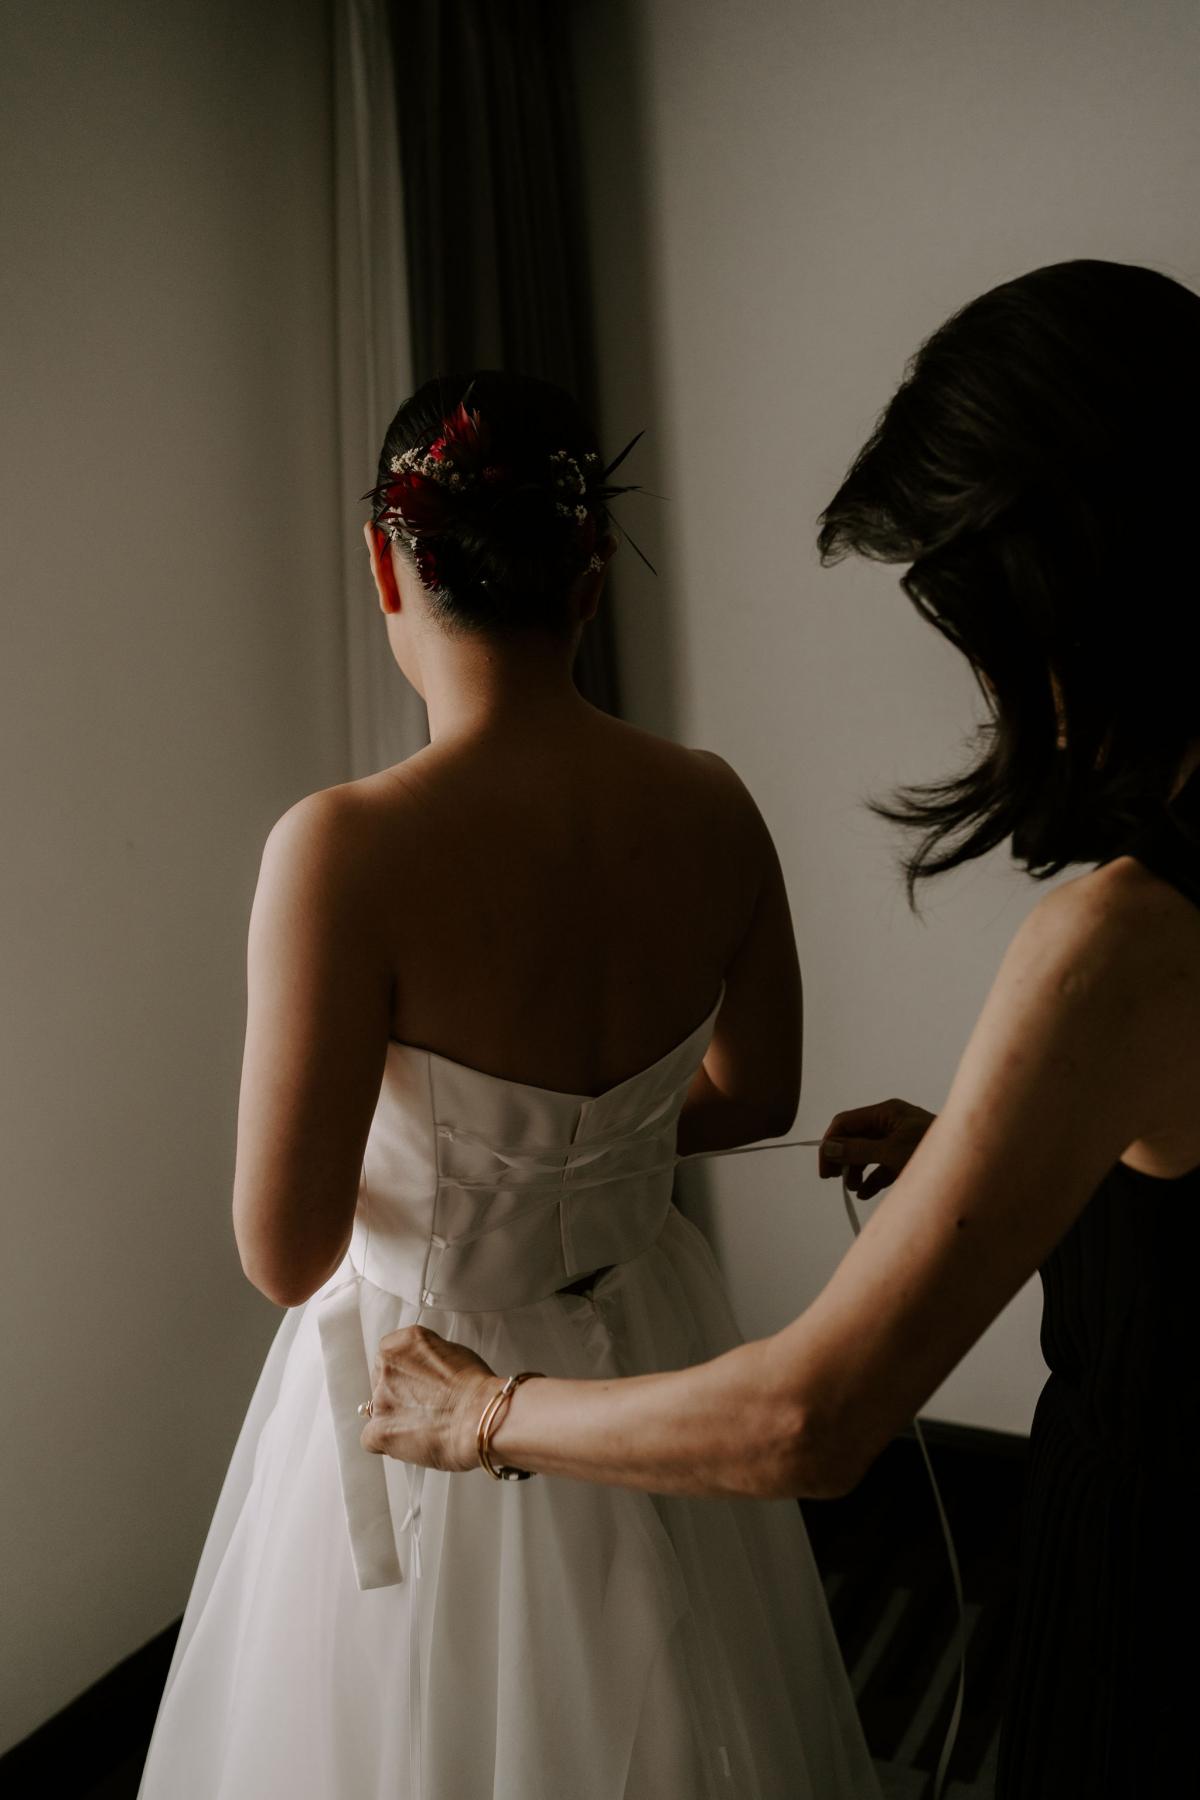 KWH real bride Sarah attaching her earring while wearing the Kitty Joni gown with twill and tulle fabrics.